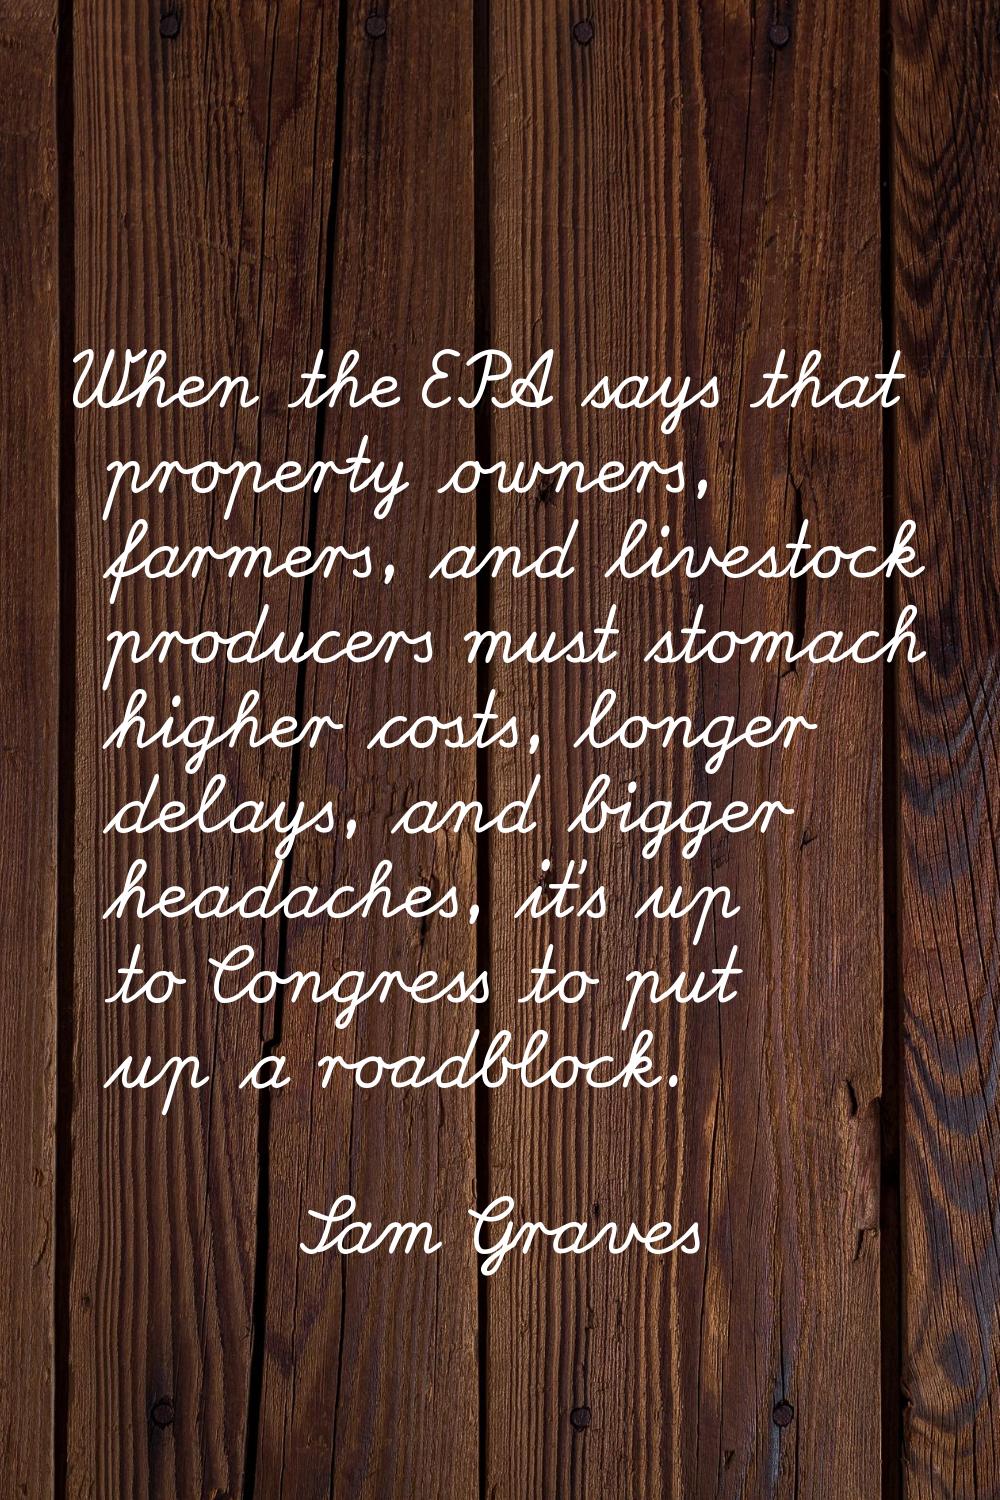 When the EPA says that property owners, farmers, and livestock producers must stomach higher costs,